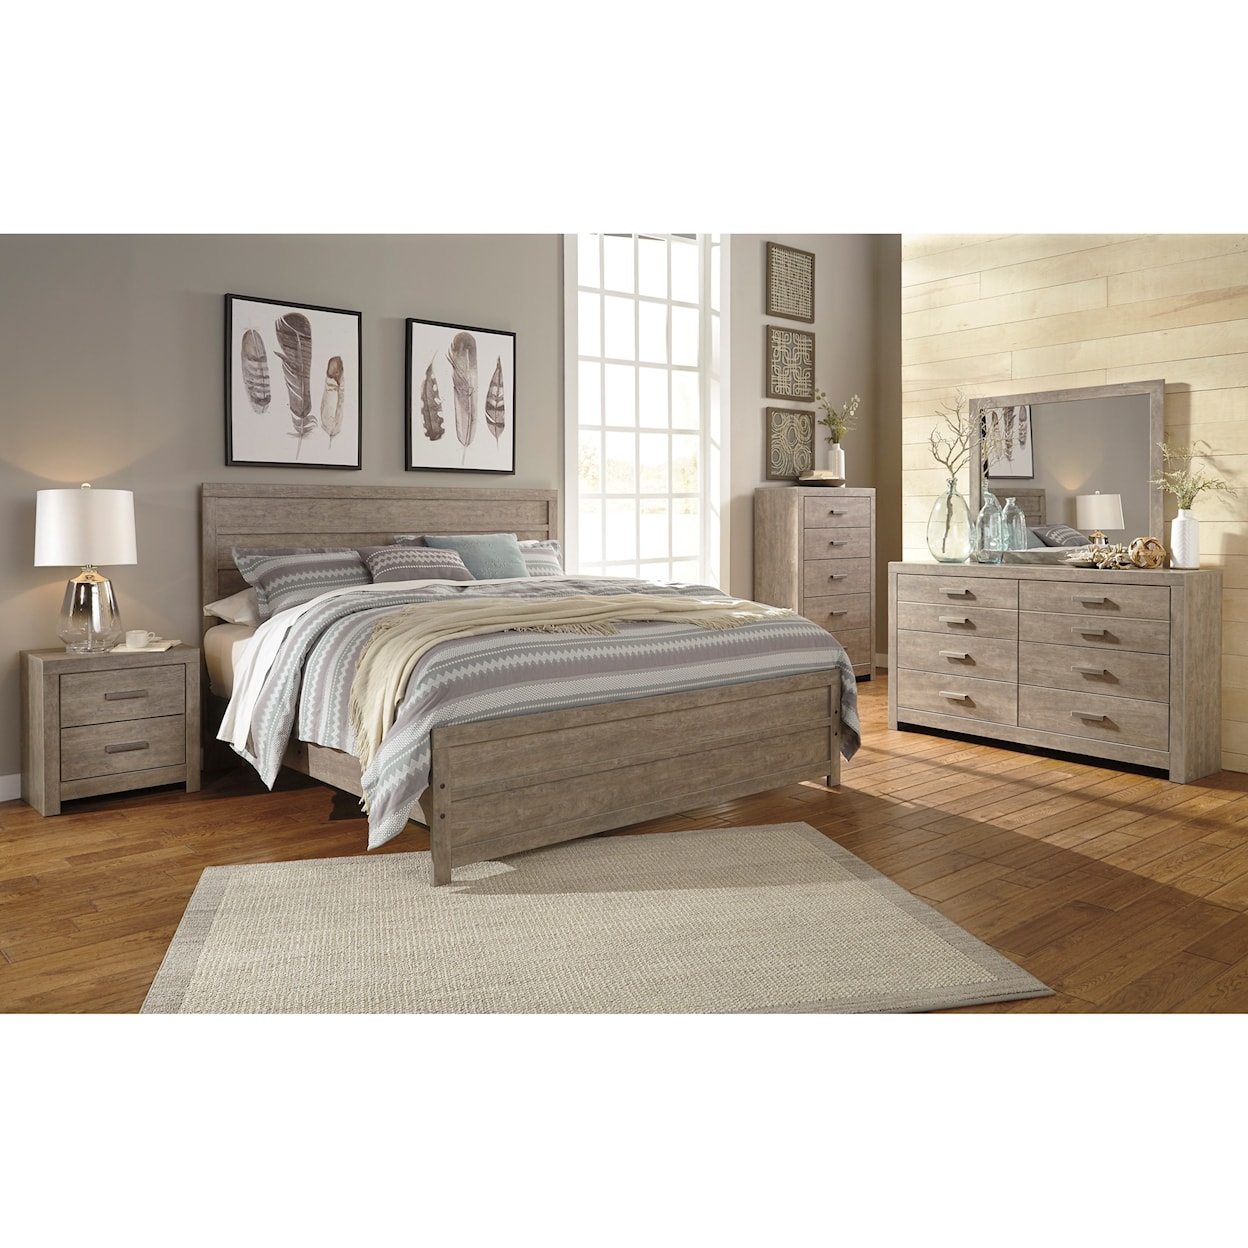 Signature Design by Ashley Furniture Culverbach King Bedroom Group